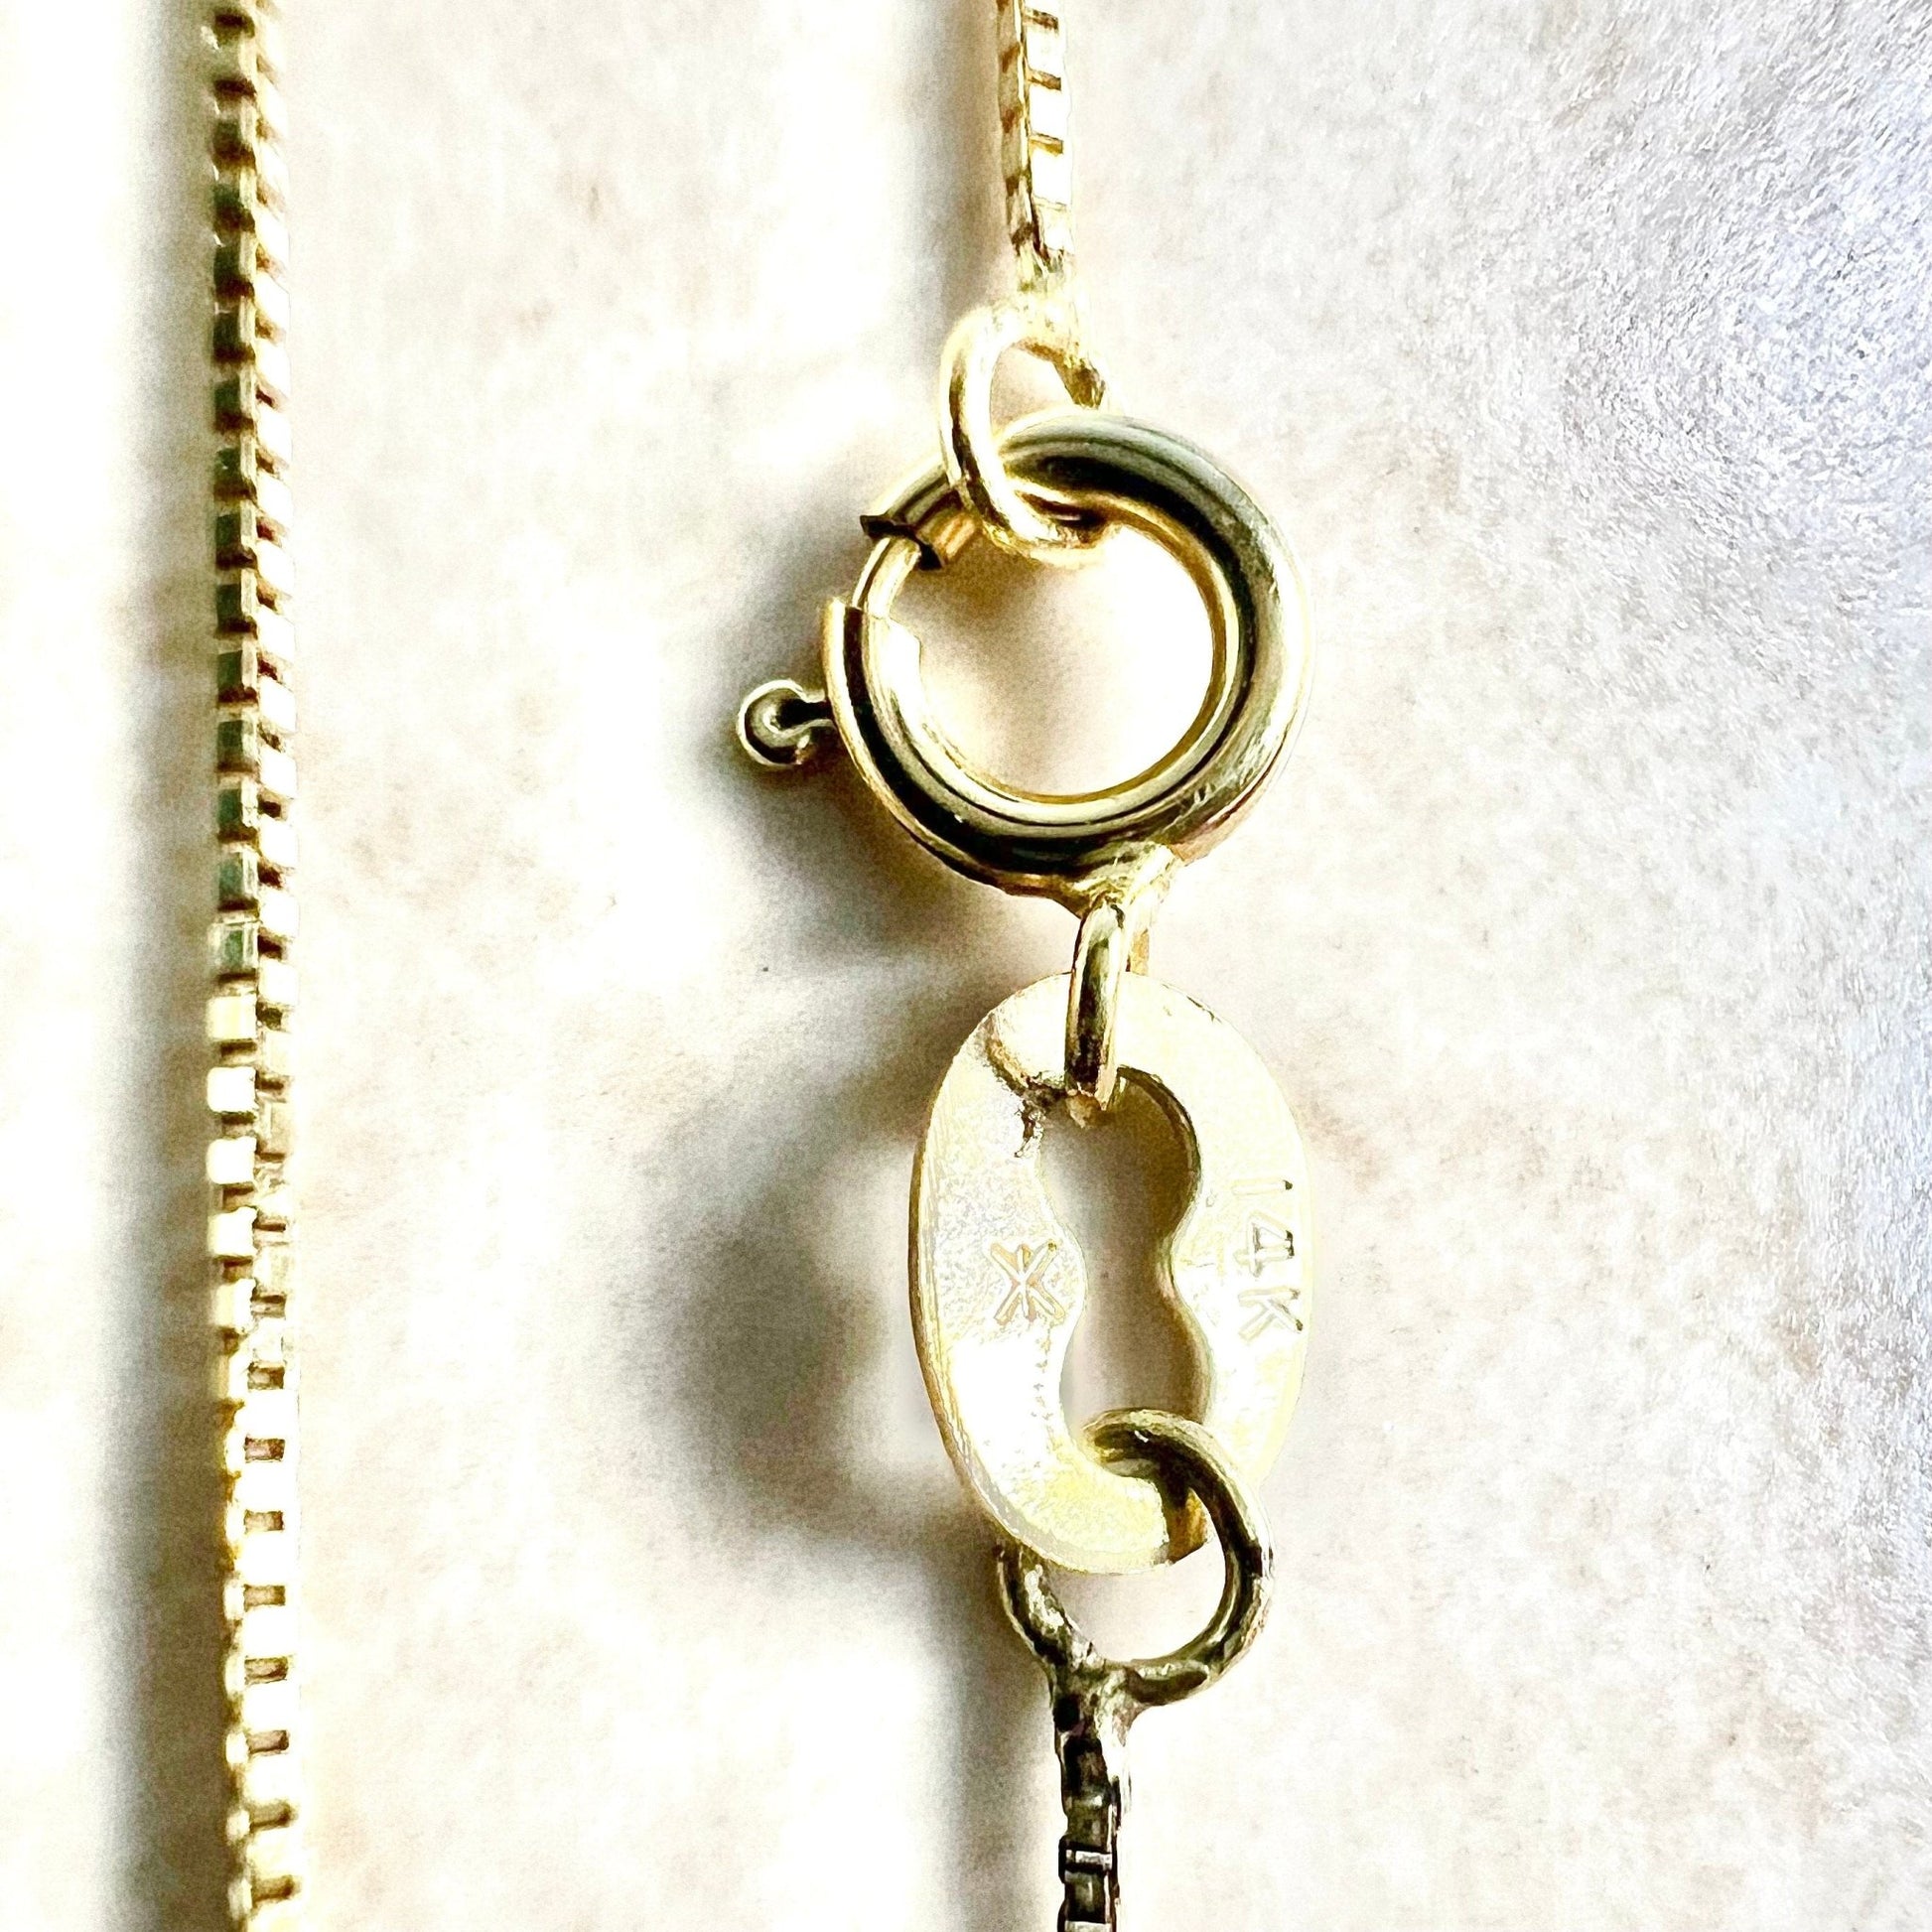 Lightweight 14K Yellow Gold Box Chain Necklace - 16 Inch Gold Chain Necklace - 14K Yellow Gold Necklace - Gift For Her - Minimalist Necklace